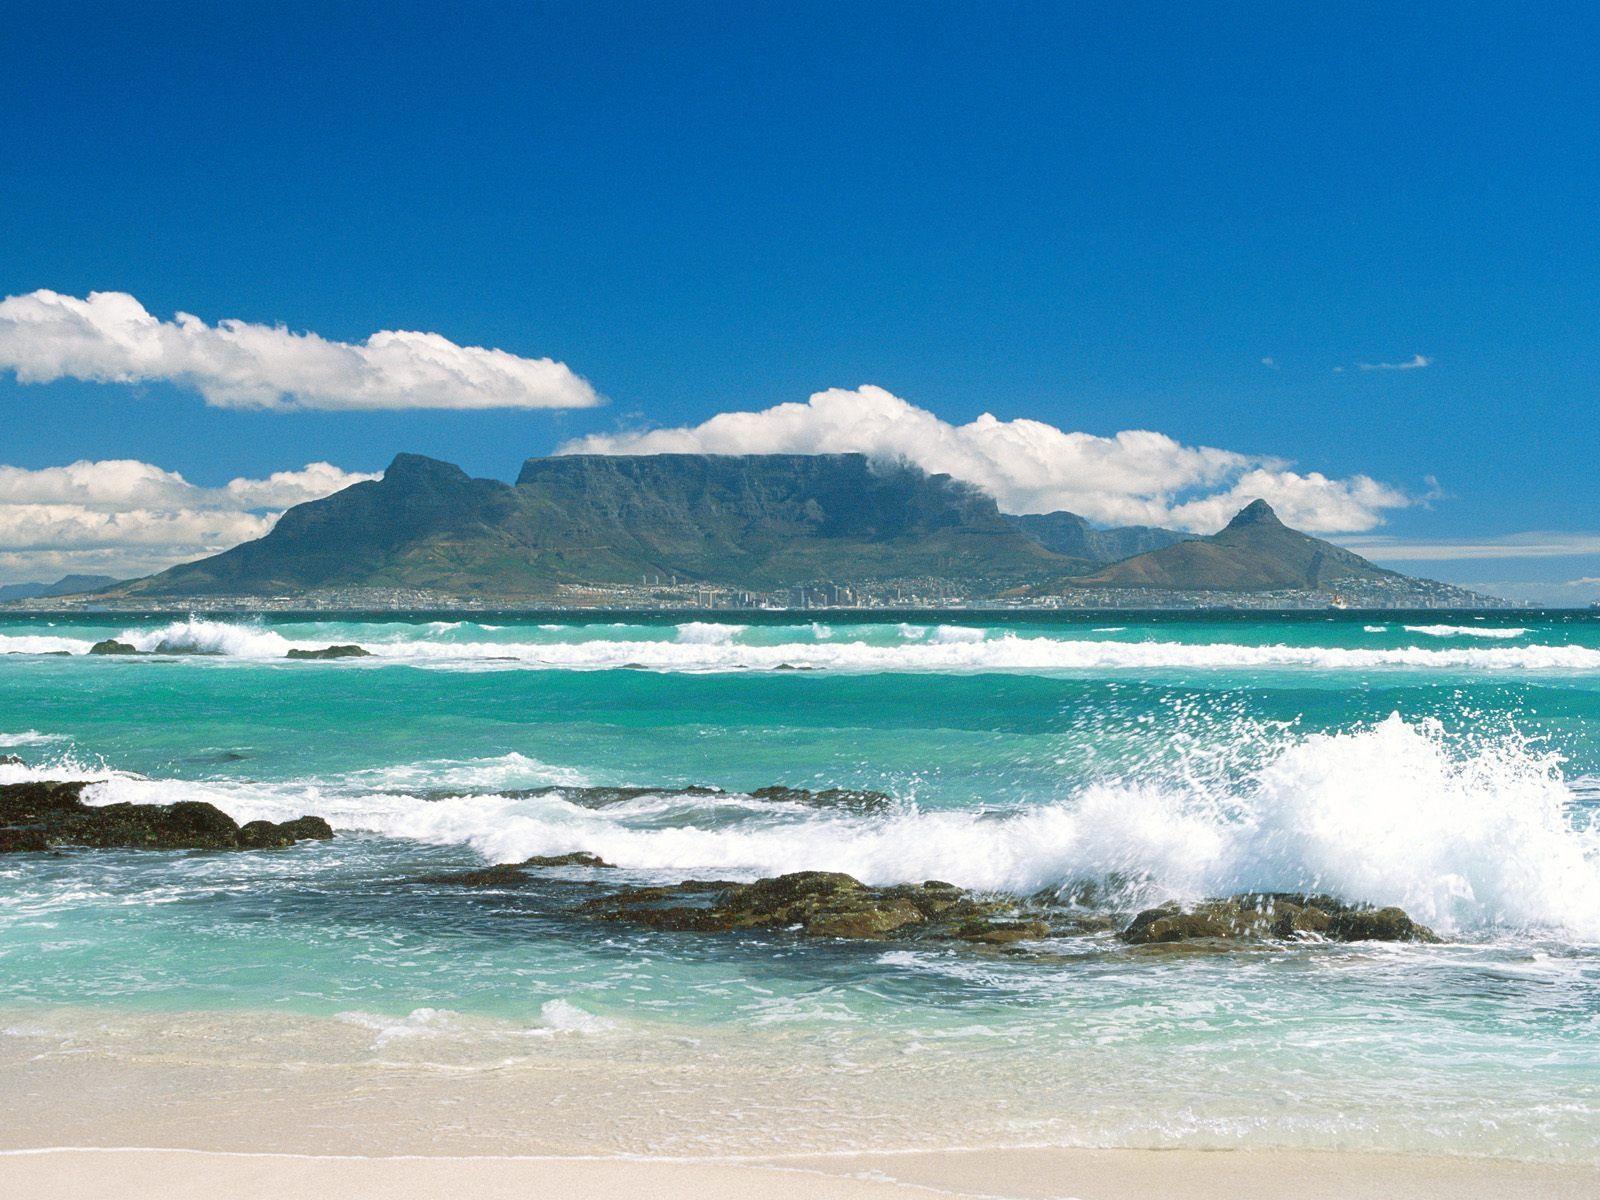 Coastline View of Table Mountain | South Africa wallpapers and